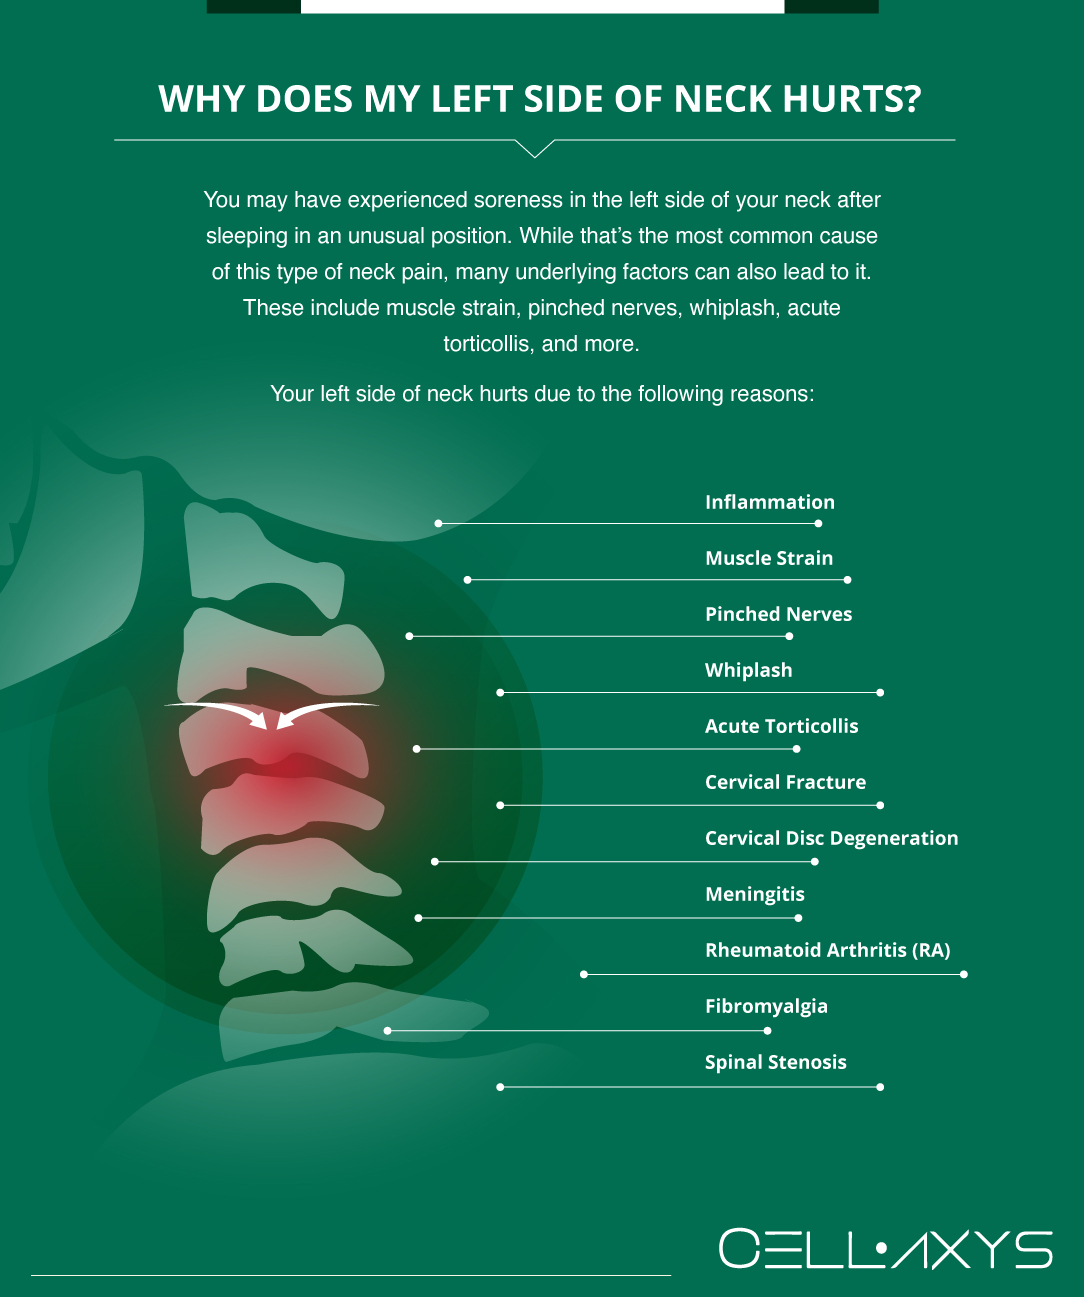 Causes of Pain in the Left Side of the Neck